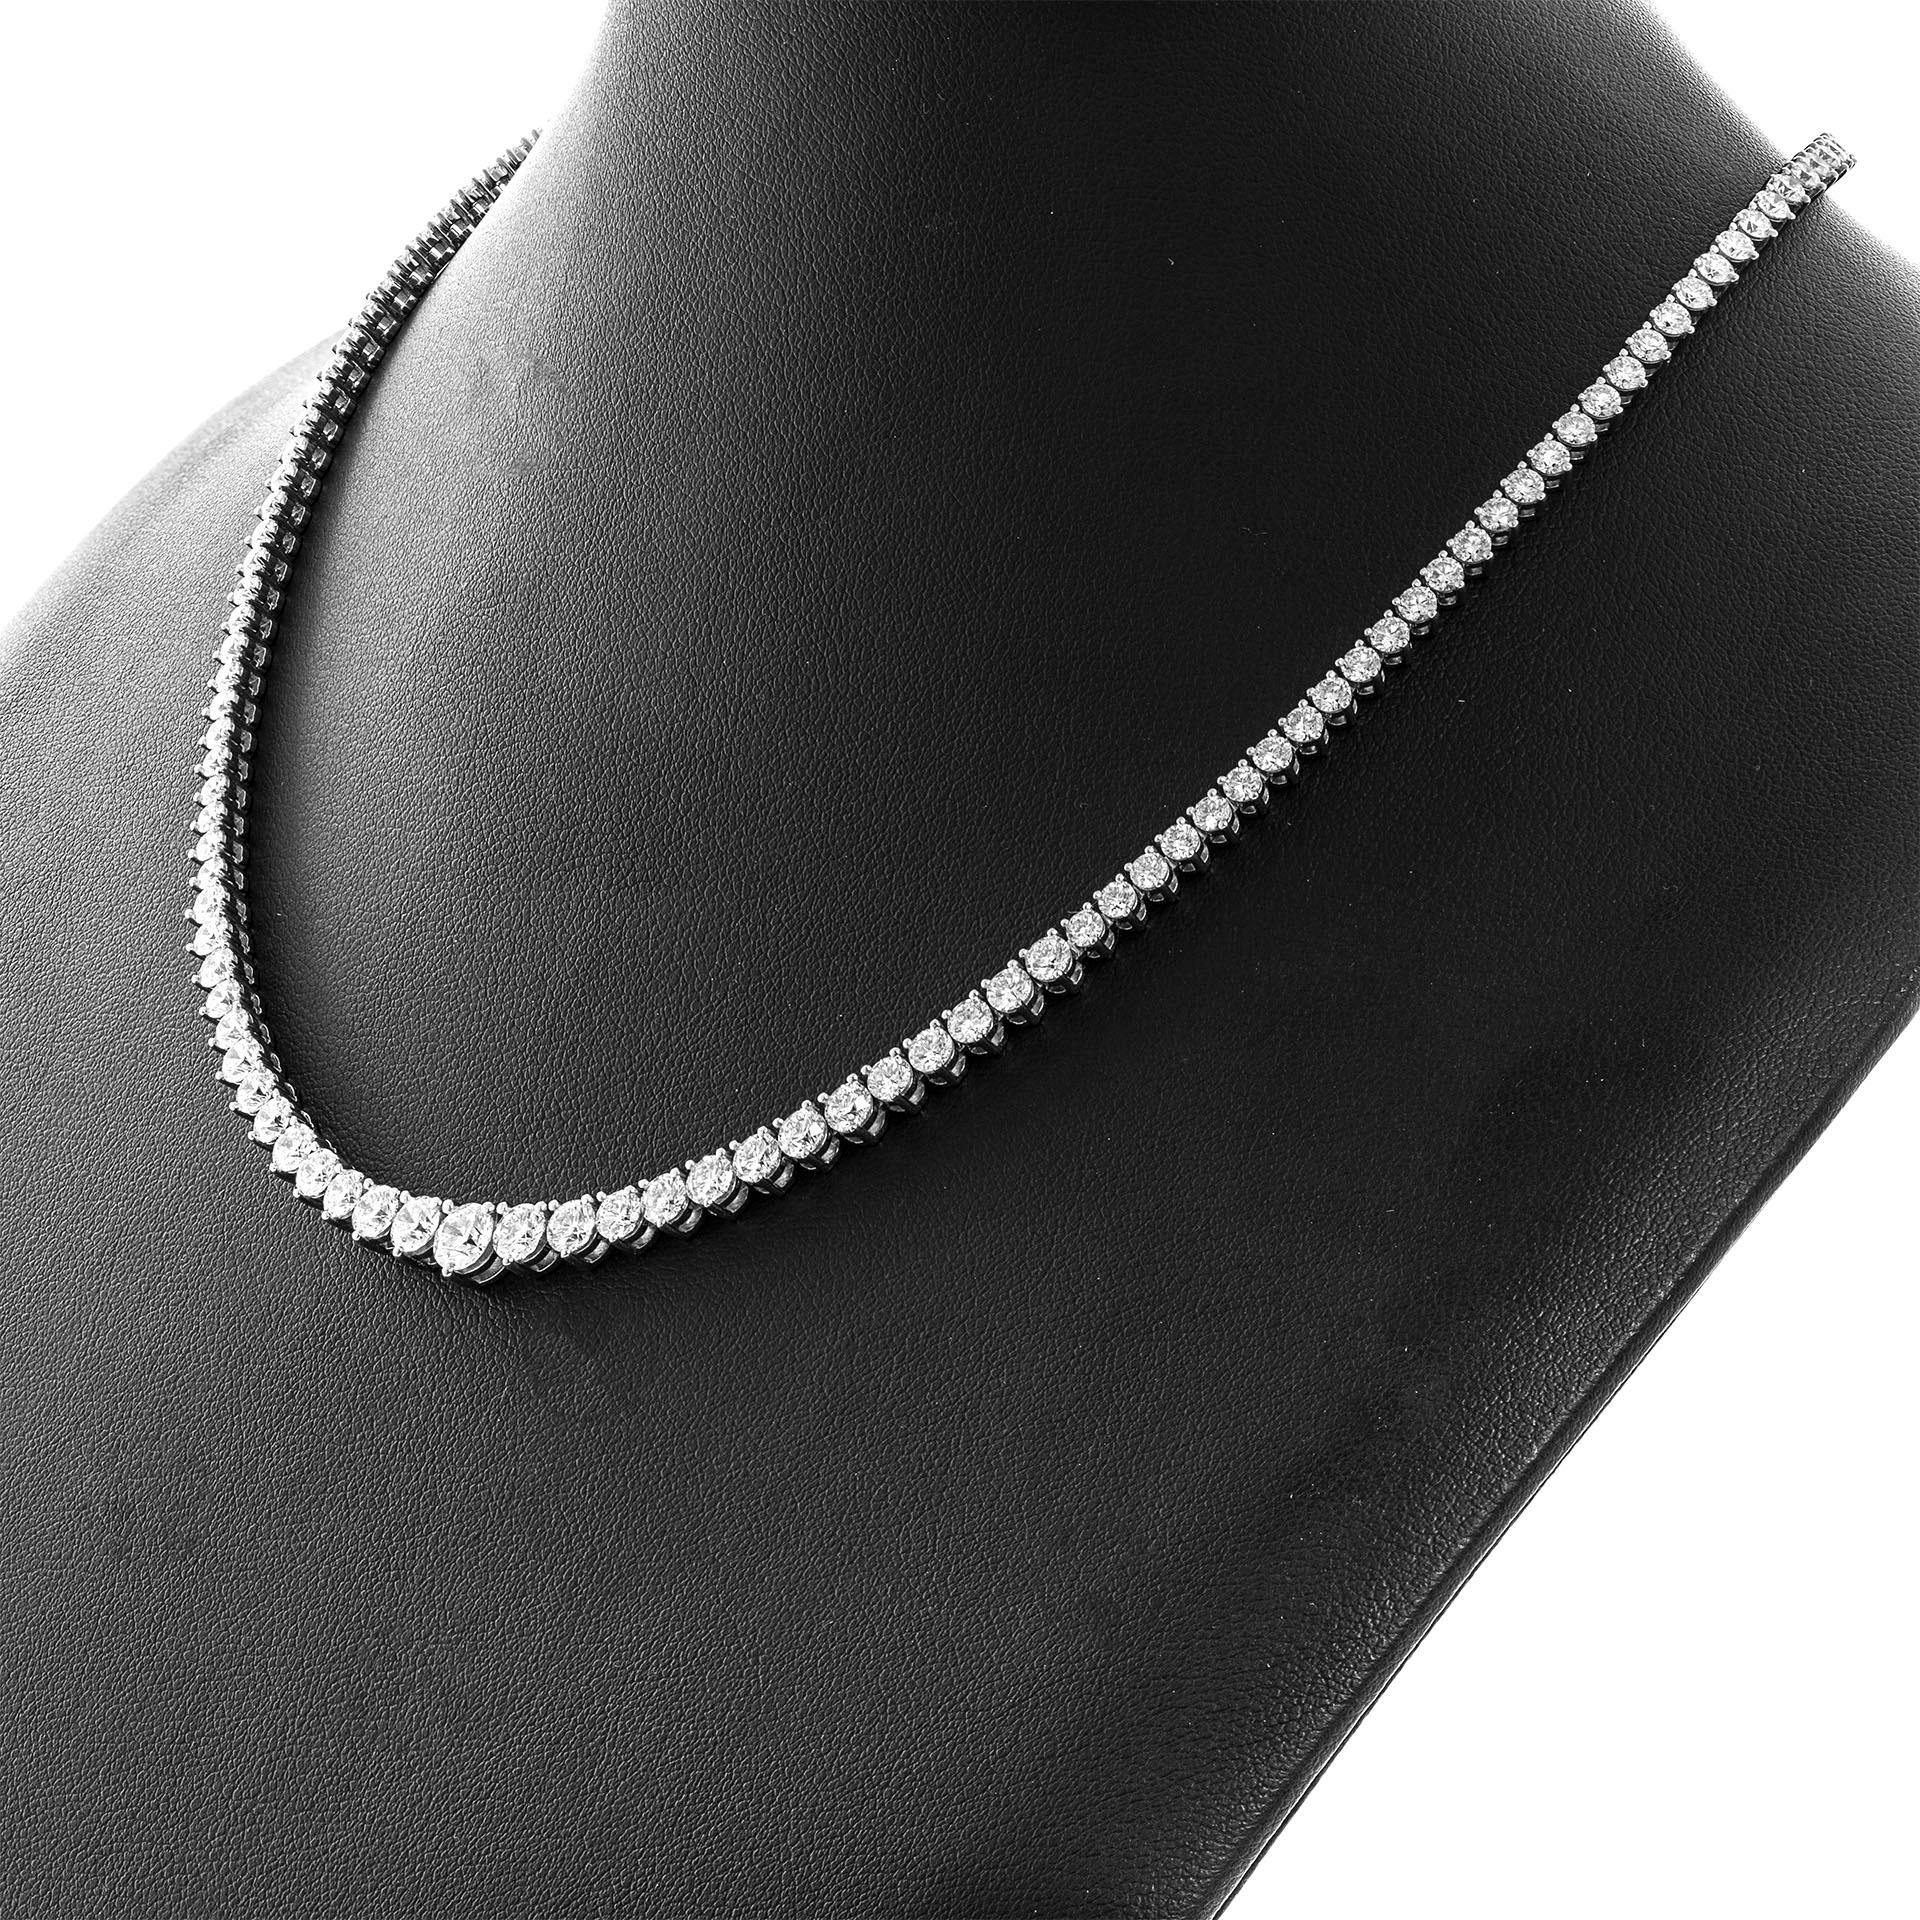 Tennis necklace in 14k WG 
16” inches
TCW:146st-11.31ct
Biggest stone is 5.10mm - smallest 2.0mm 


